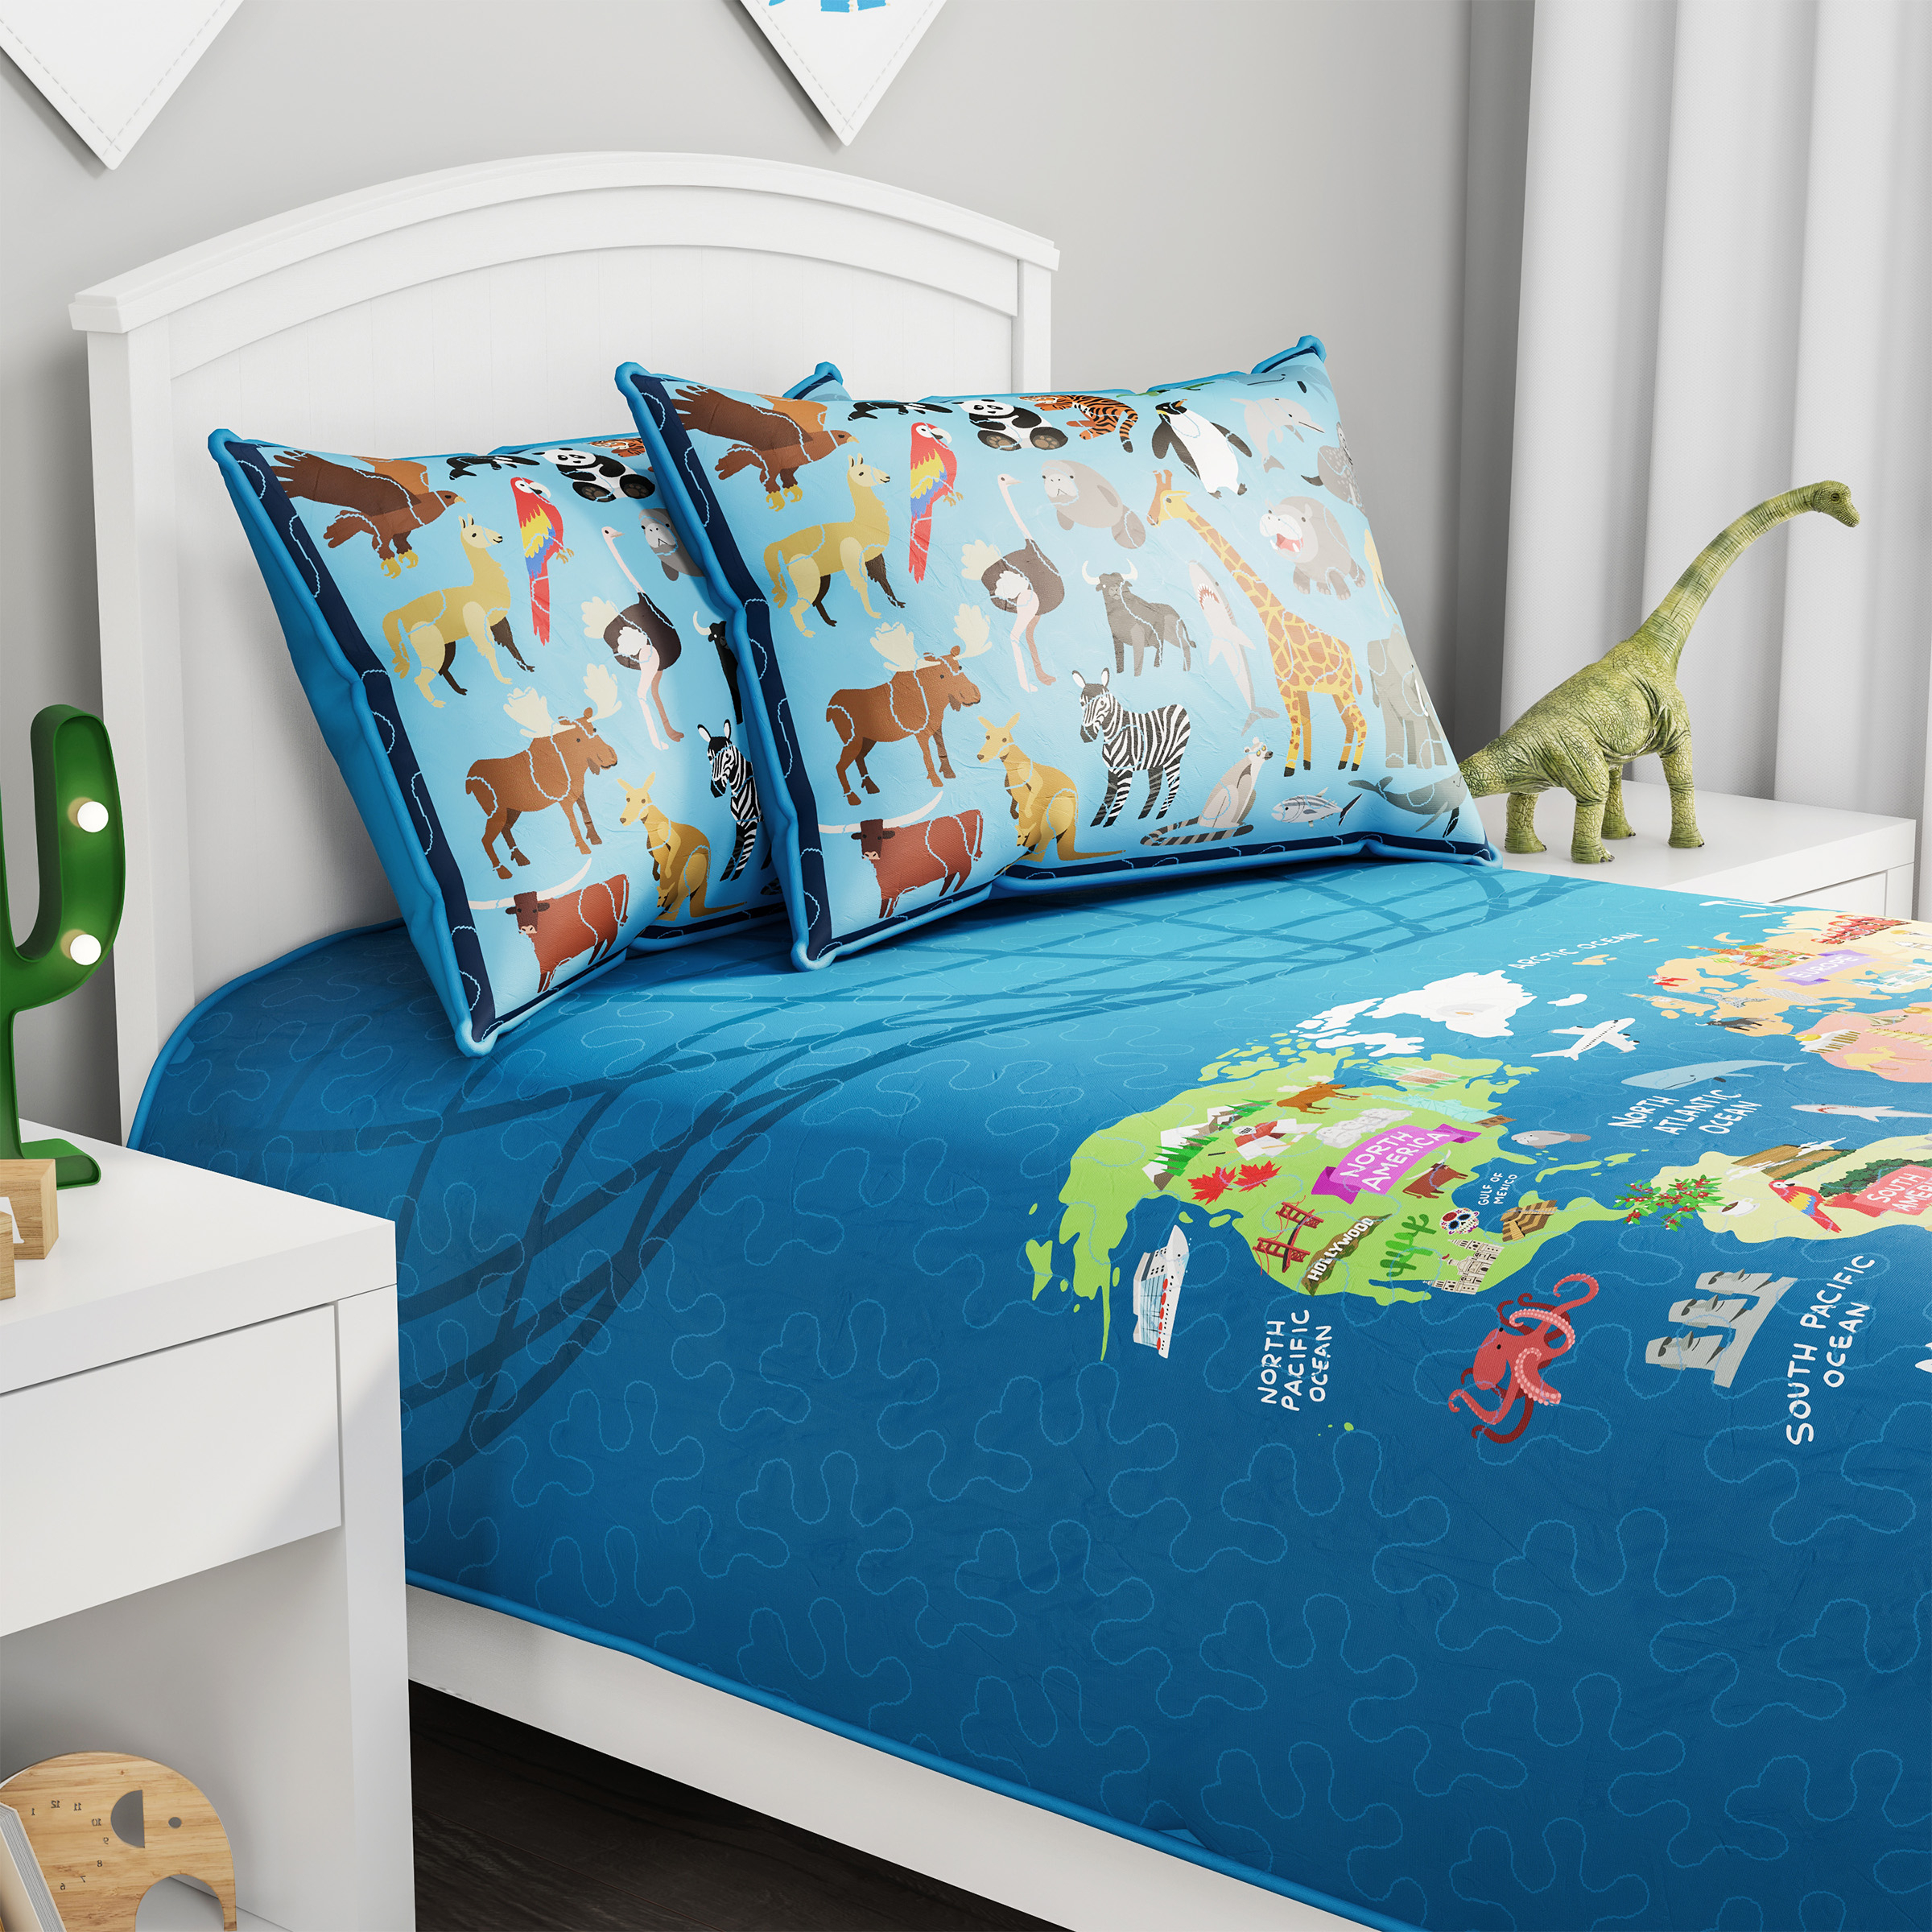 Twin XL Comforter Set World Map 2 Pillow Shams With Animals Kids Bedding 3 Pc Set Childs Room